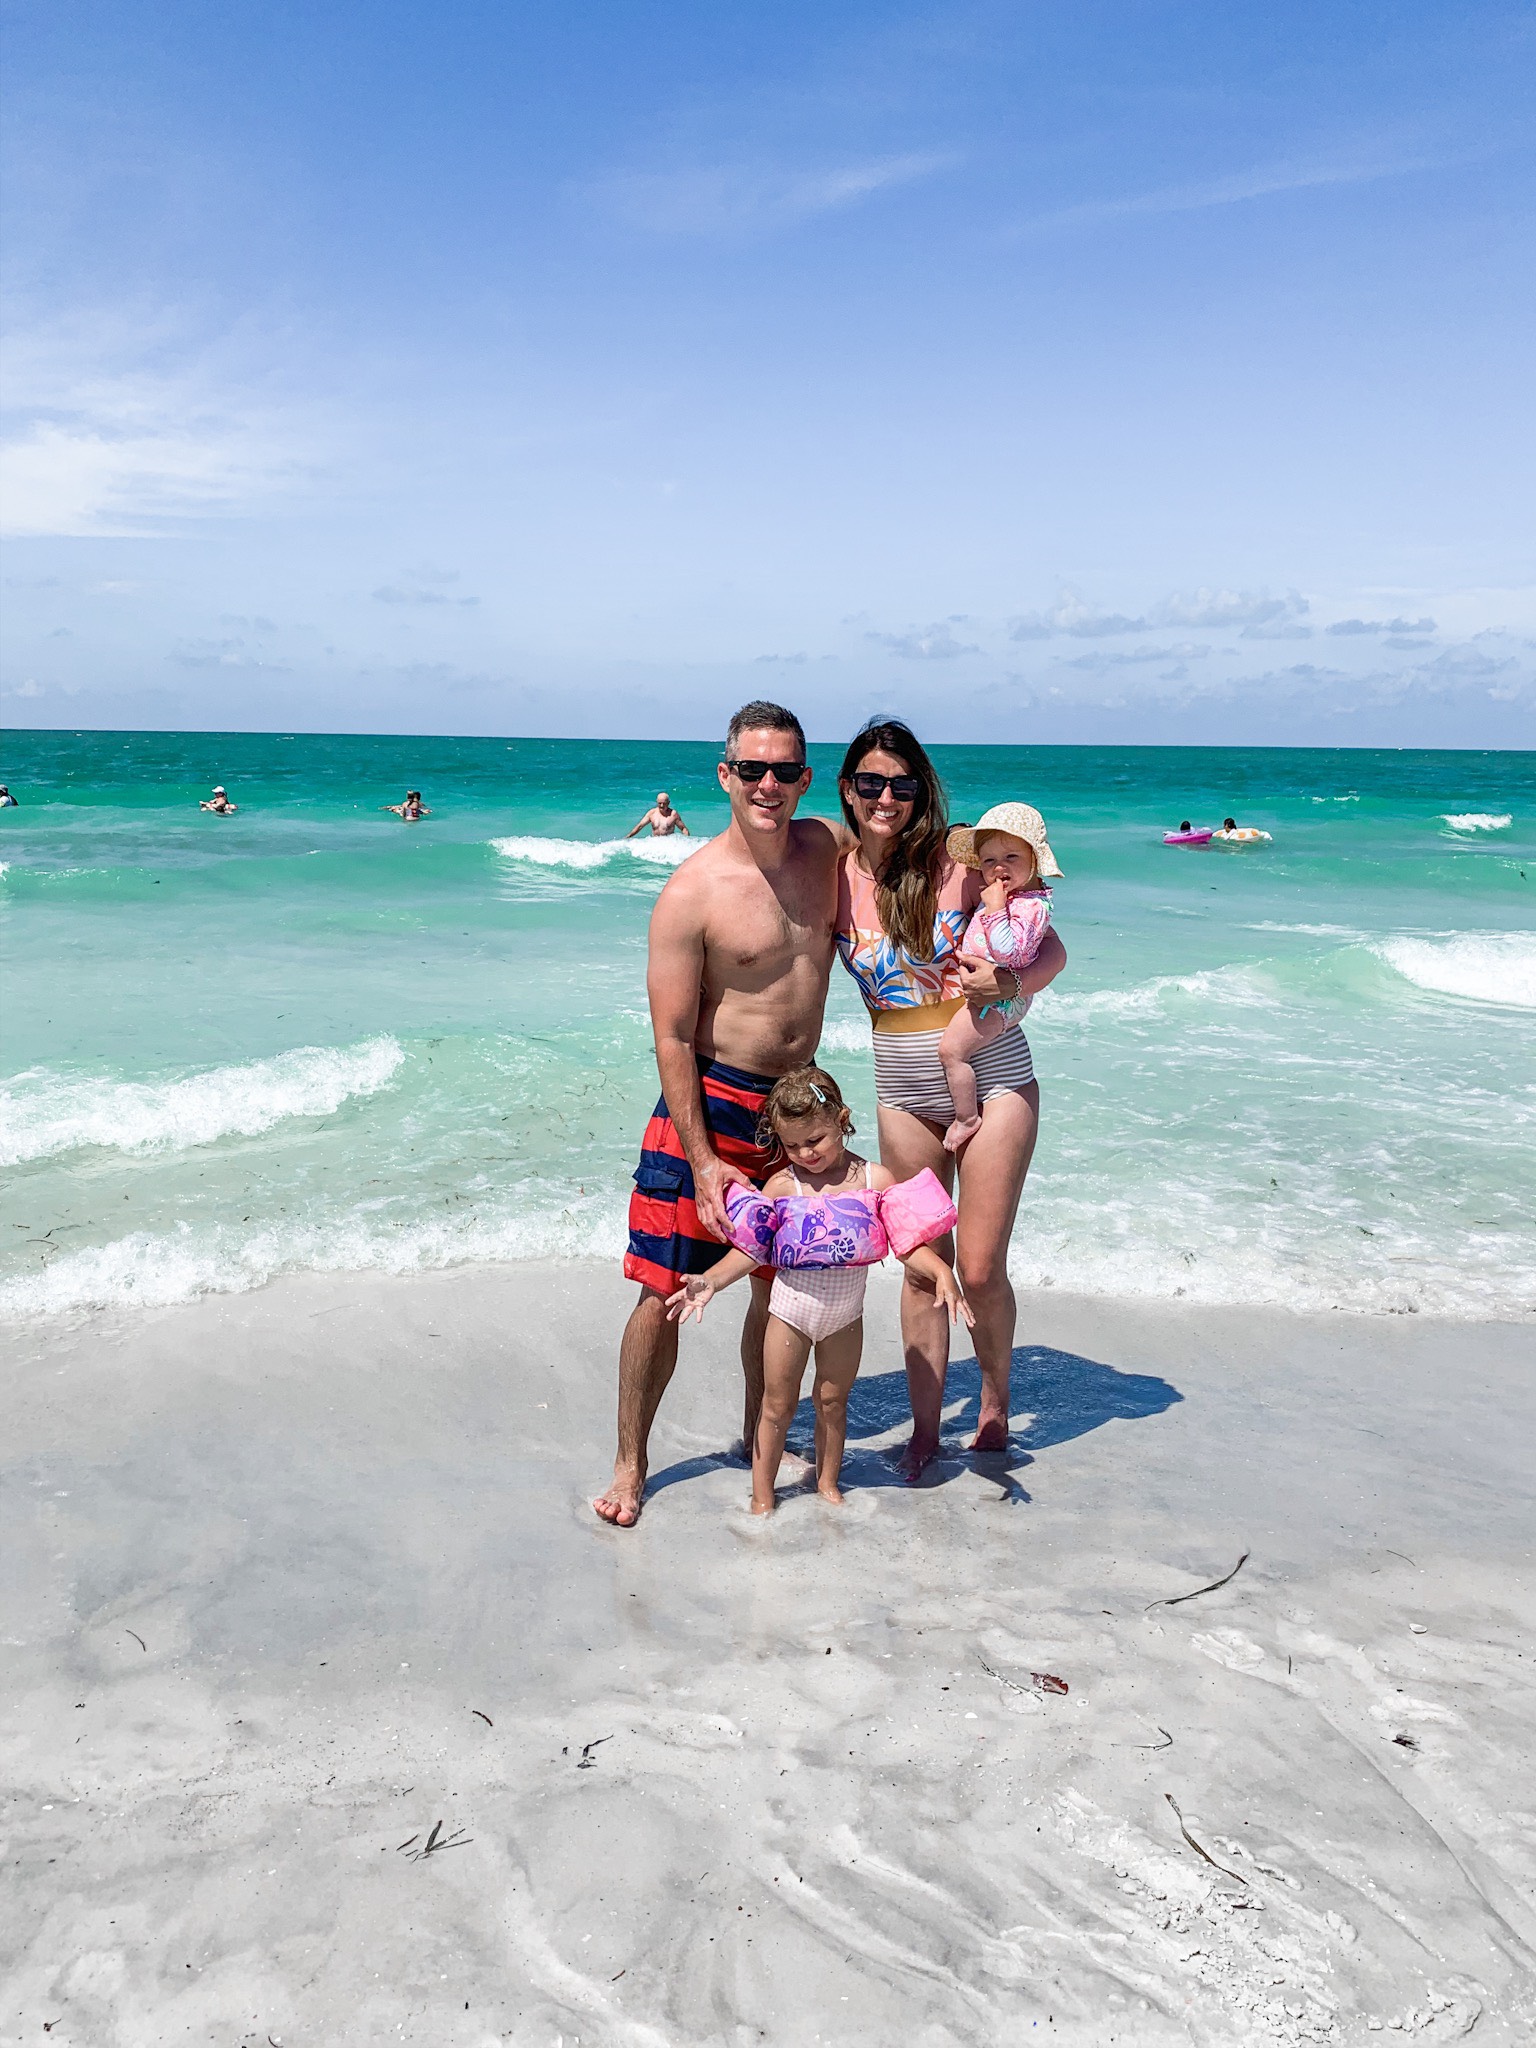 Our Anna Maria Island Family Vacation